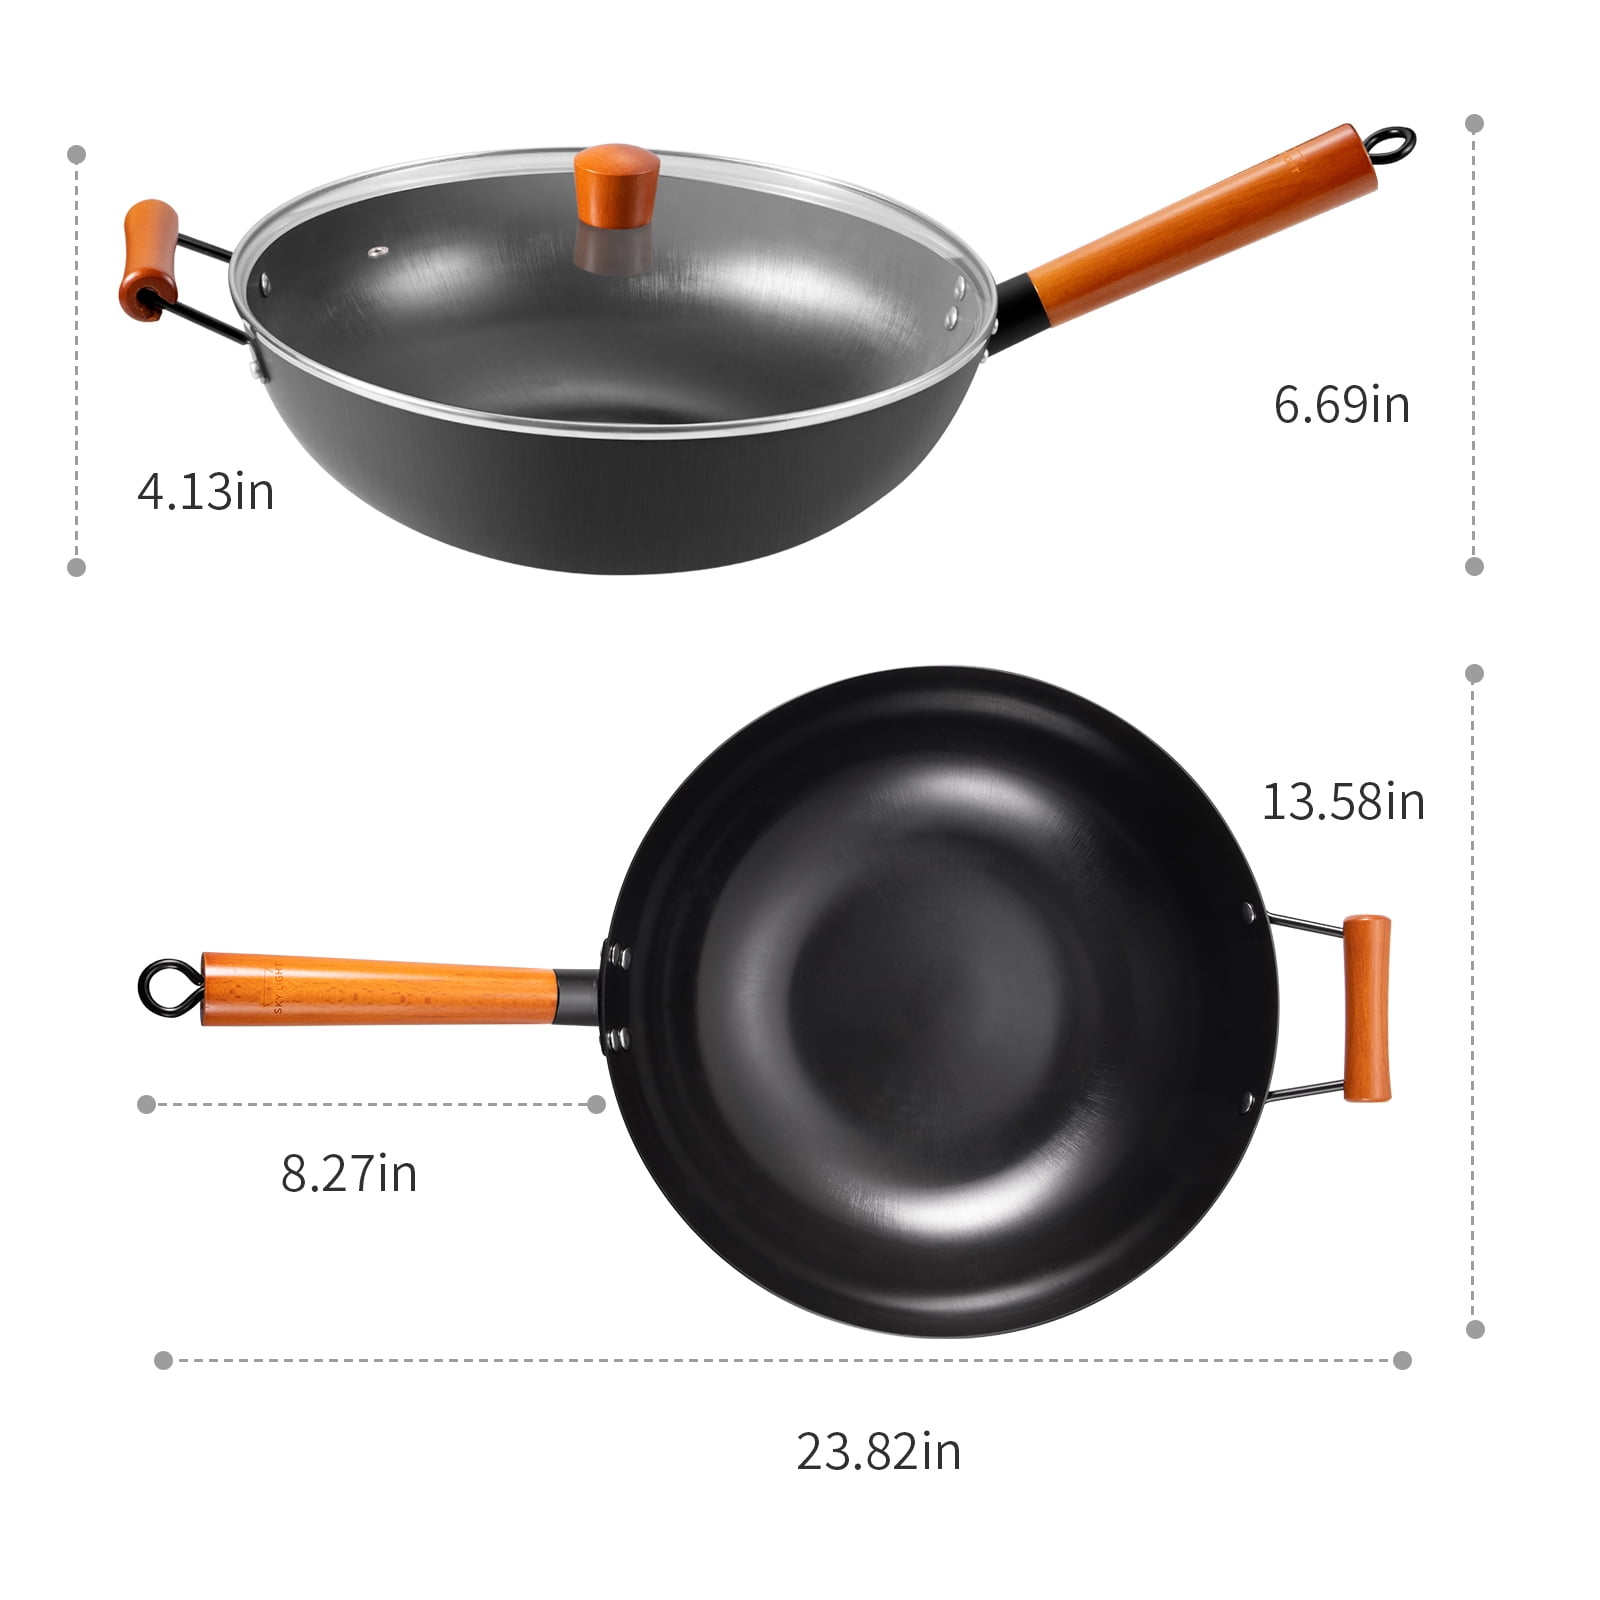 SKY LIGHT Carbon Steel Frying Pan, 9.5 inch Iron Skillet, No Chemical  Omelette Pan with Detachable Wooden Handle, Scratch Resistant Flat Bottom,  No Nonstick Coating, Induction Compatible 